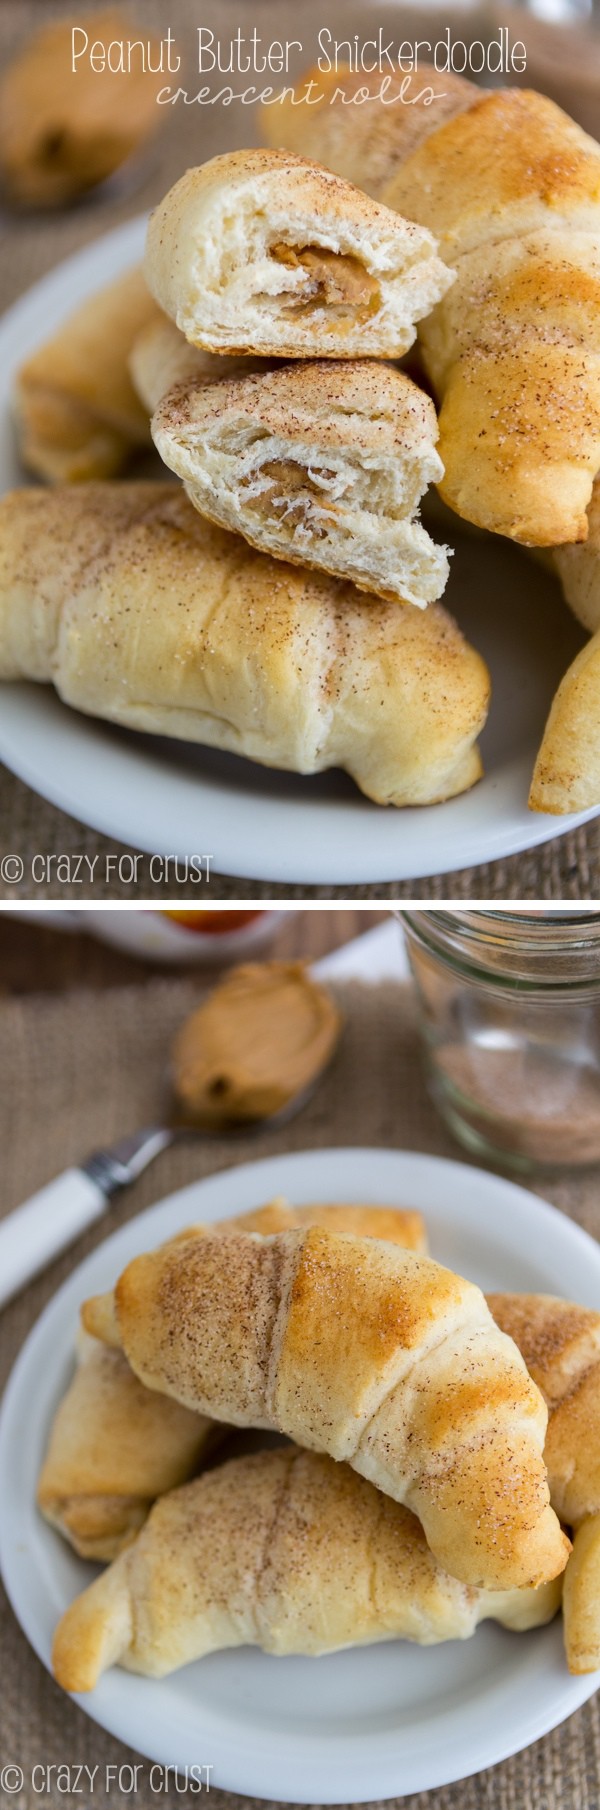 Peanut Butter Snickerdoodle Crescent Rolls sitting on a white plate collage